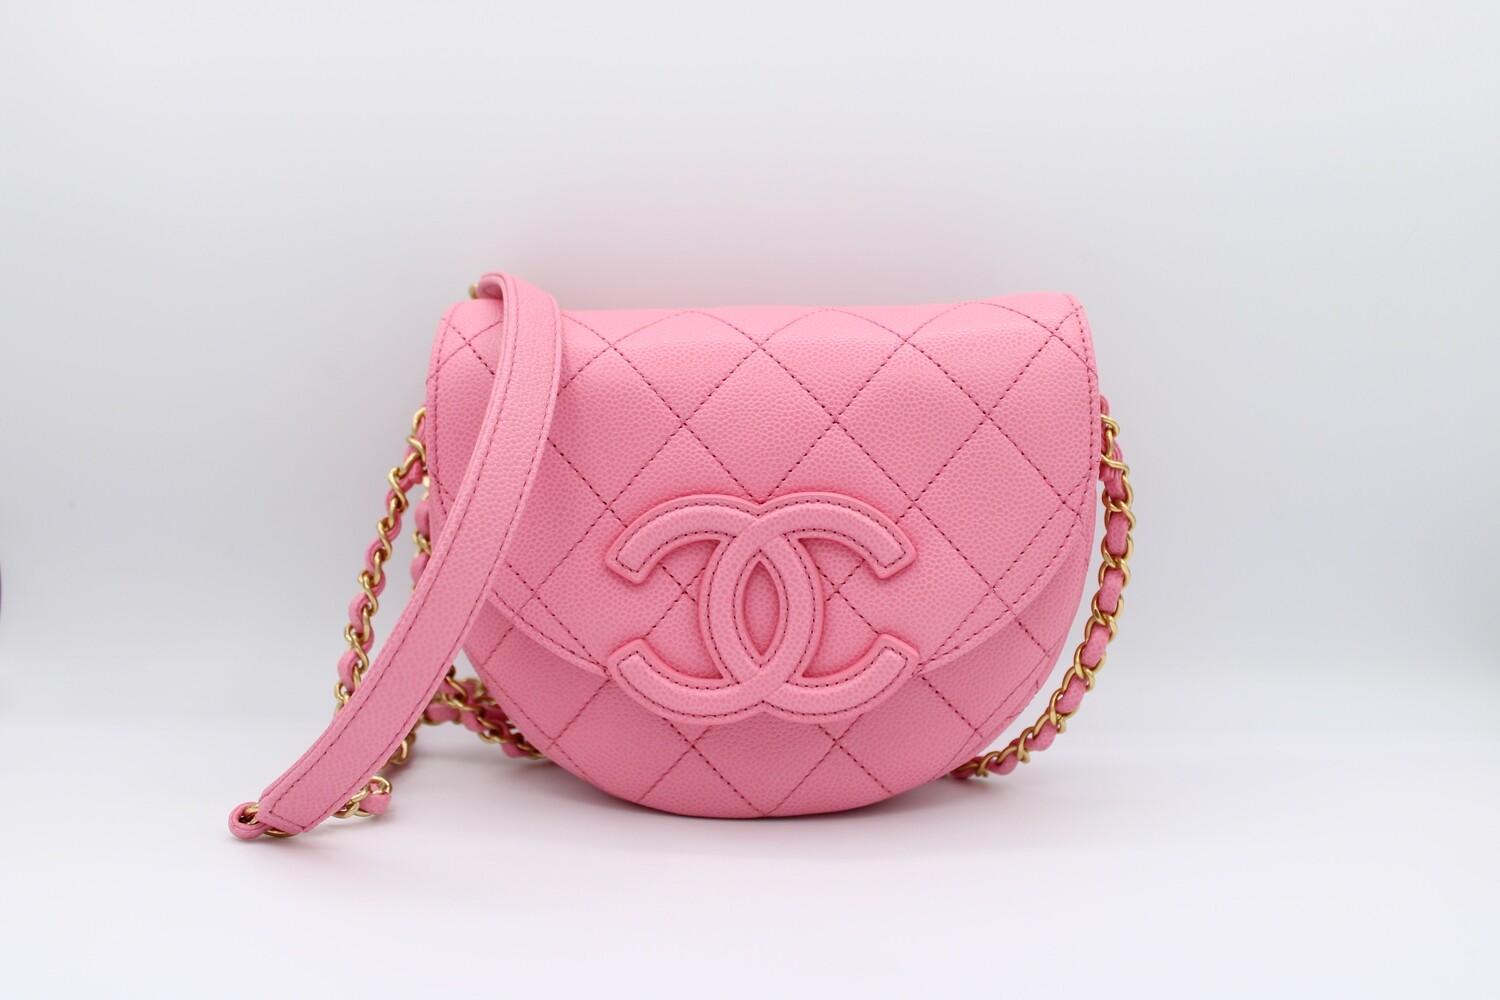 Chanel Mini Messenger Bag, Pink Caviar Leather, Gold Hardware, New in Box MA001